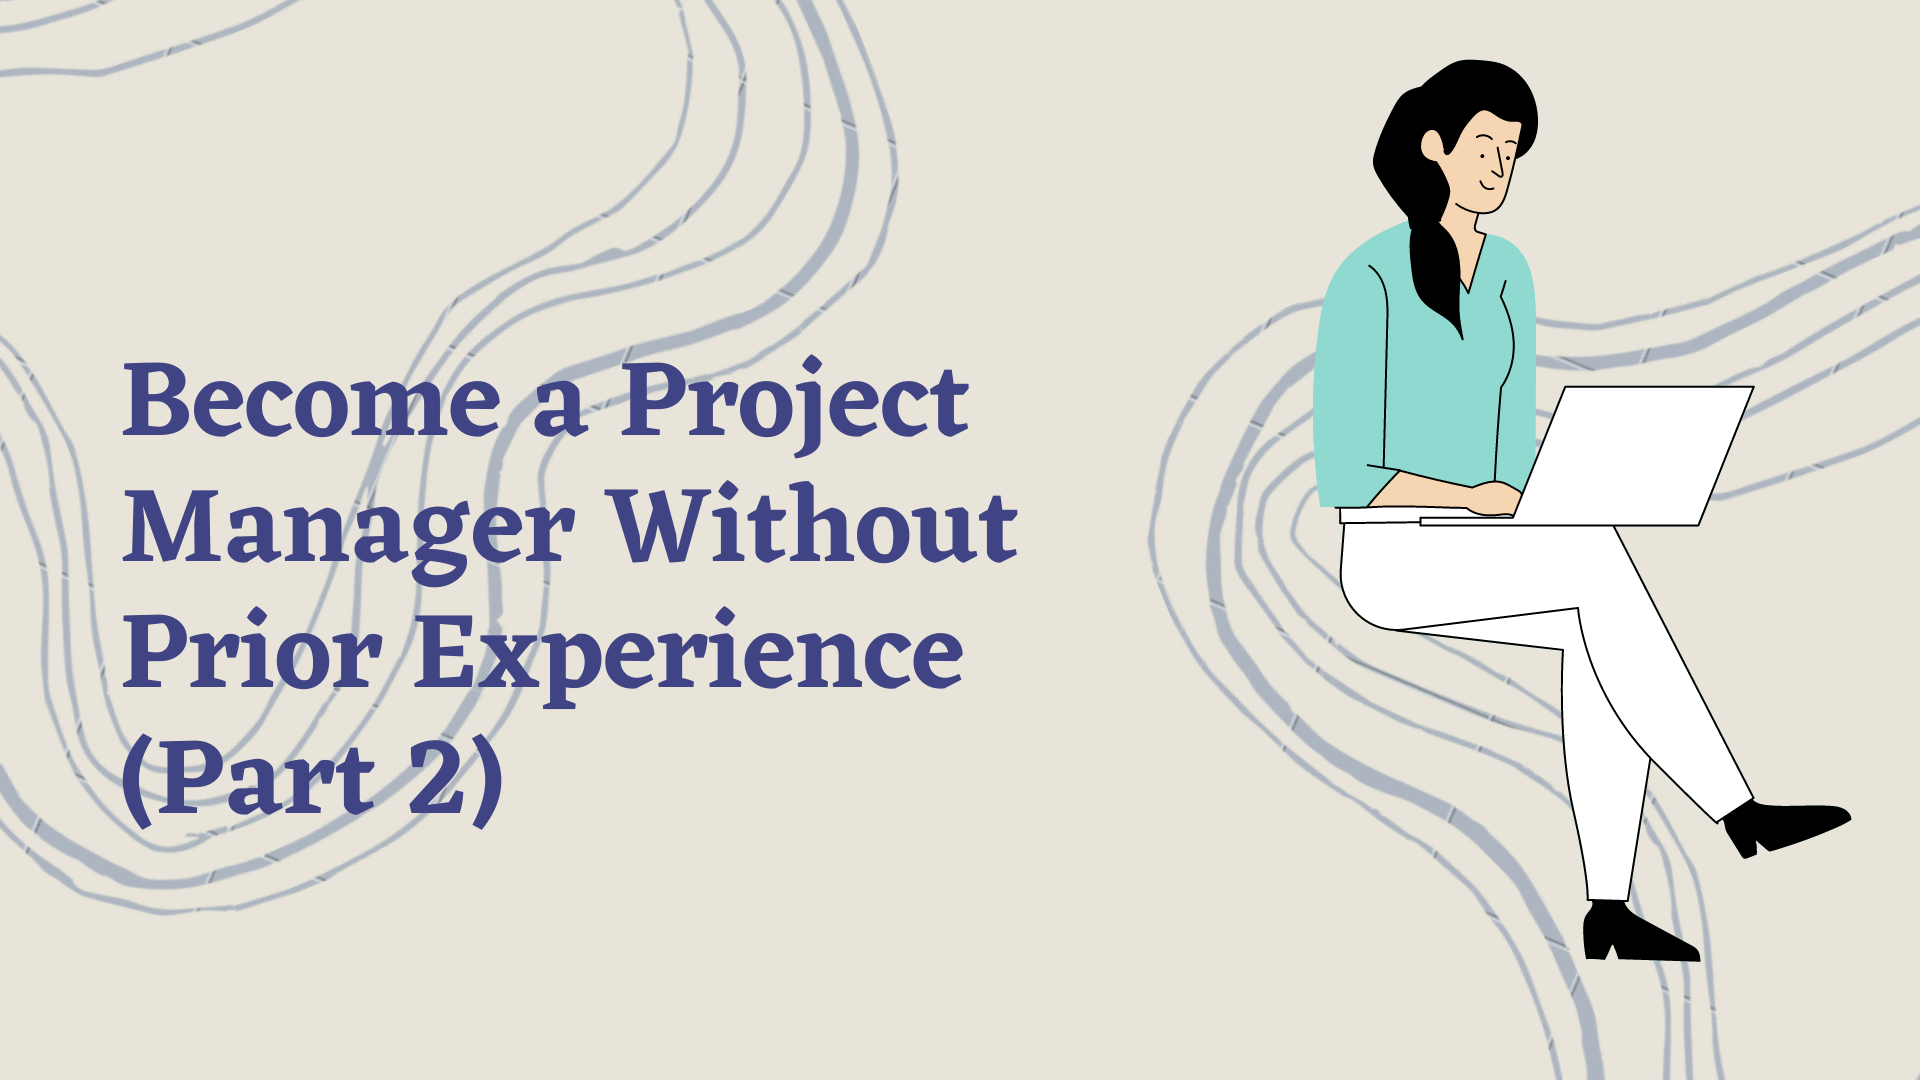 Become a Project Manager Without Prior Experience (Part 2)